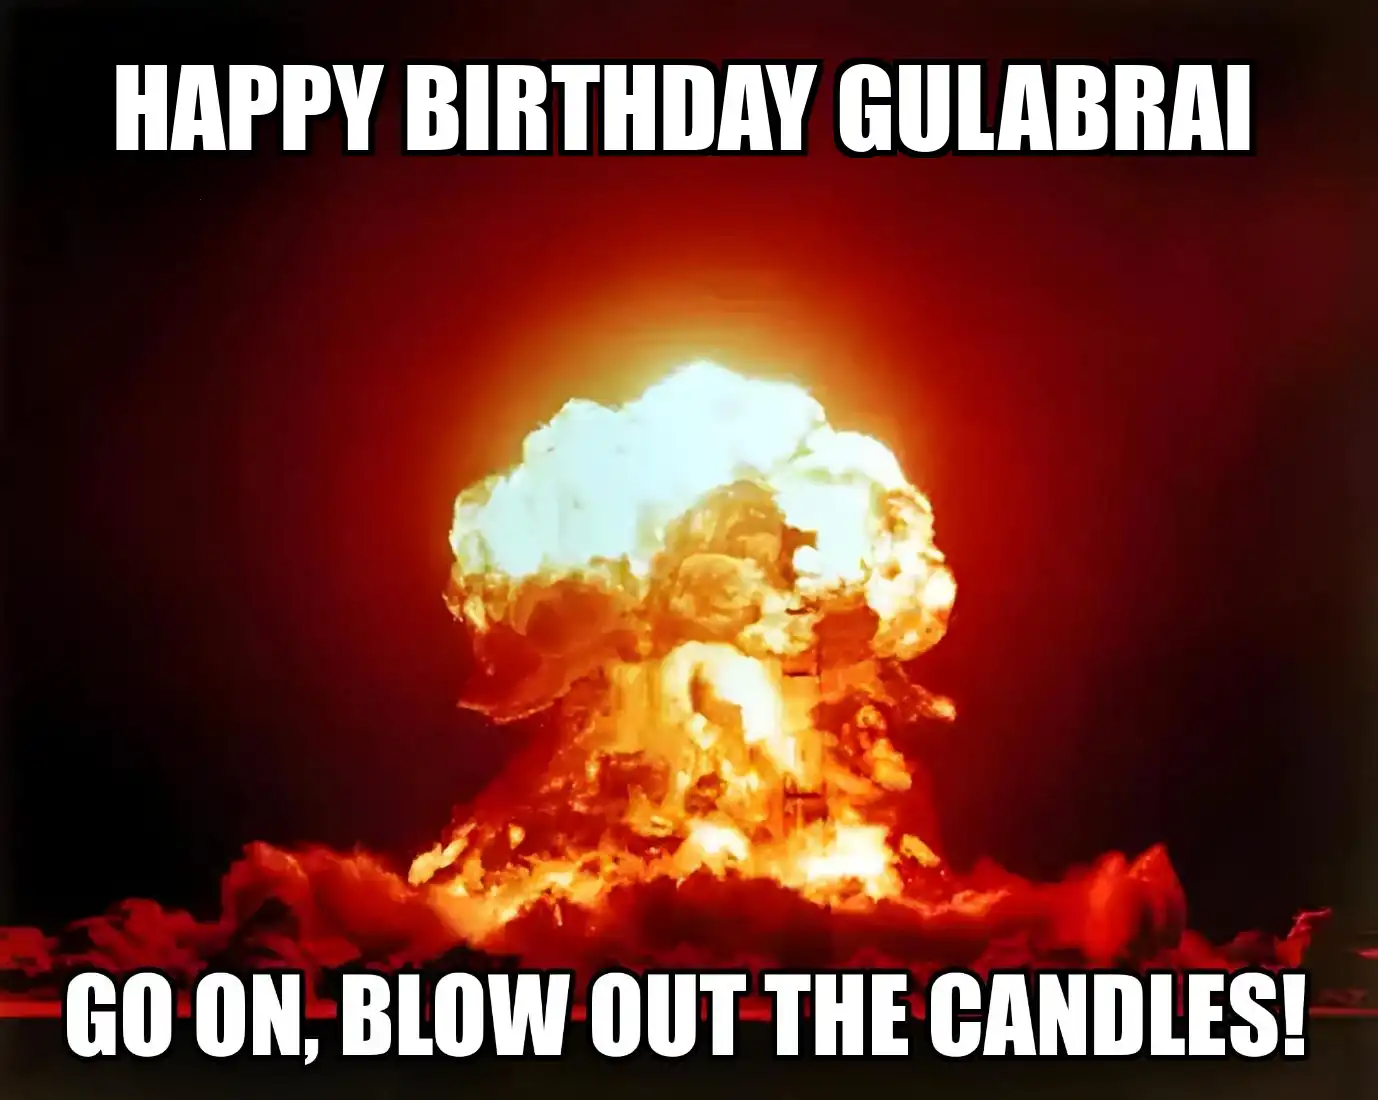 Happy Birthday Gulabrai Go On Blow Out The Candles Meme